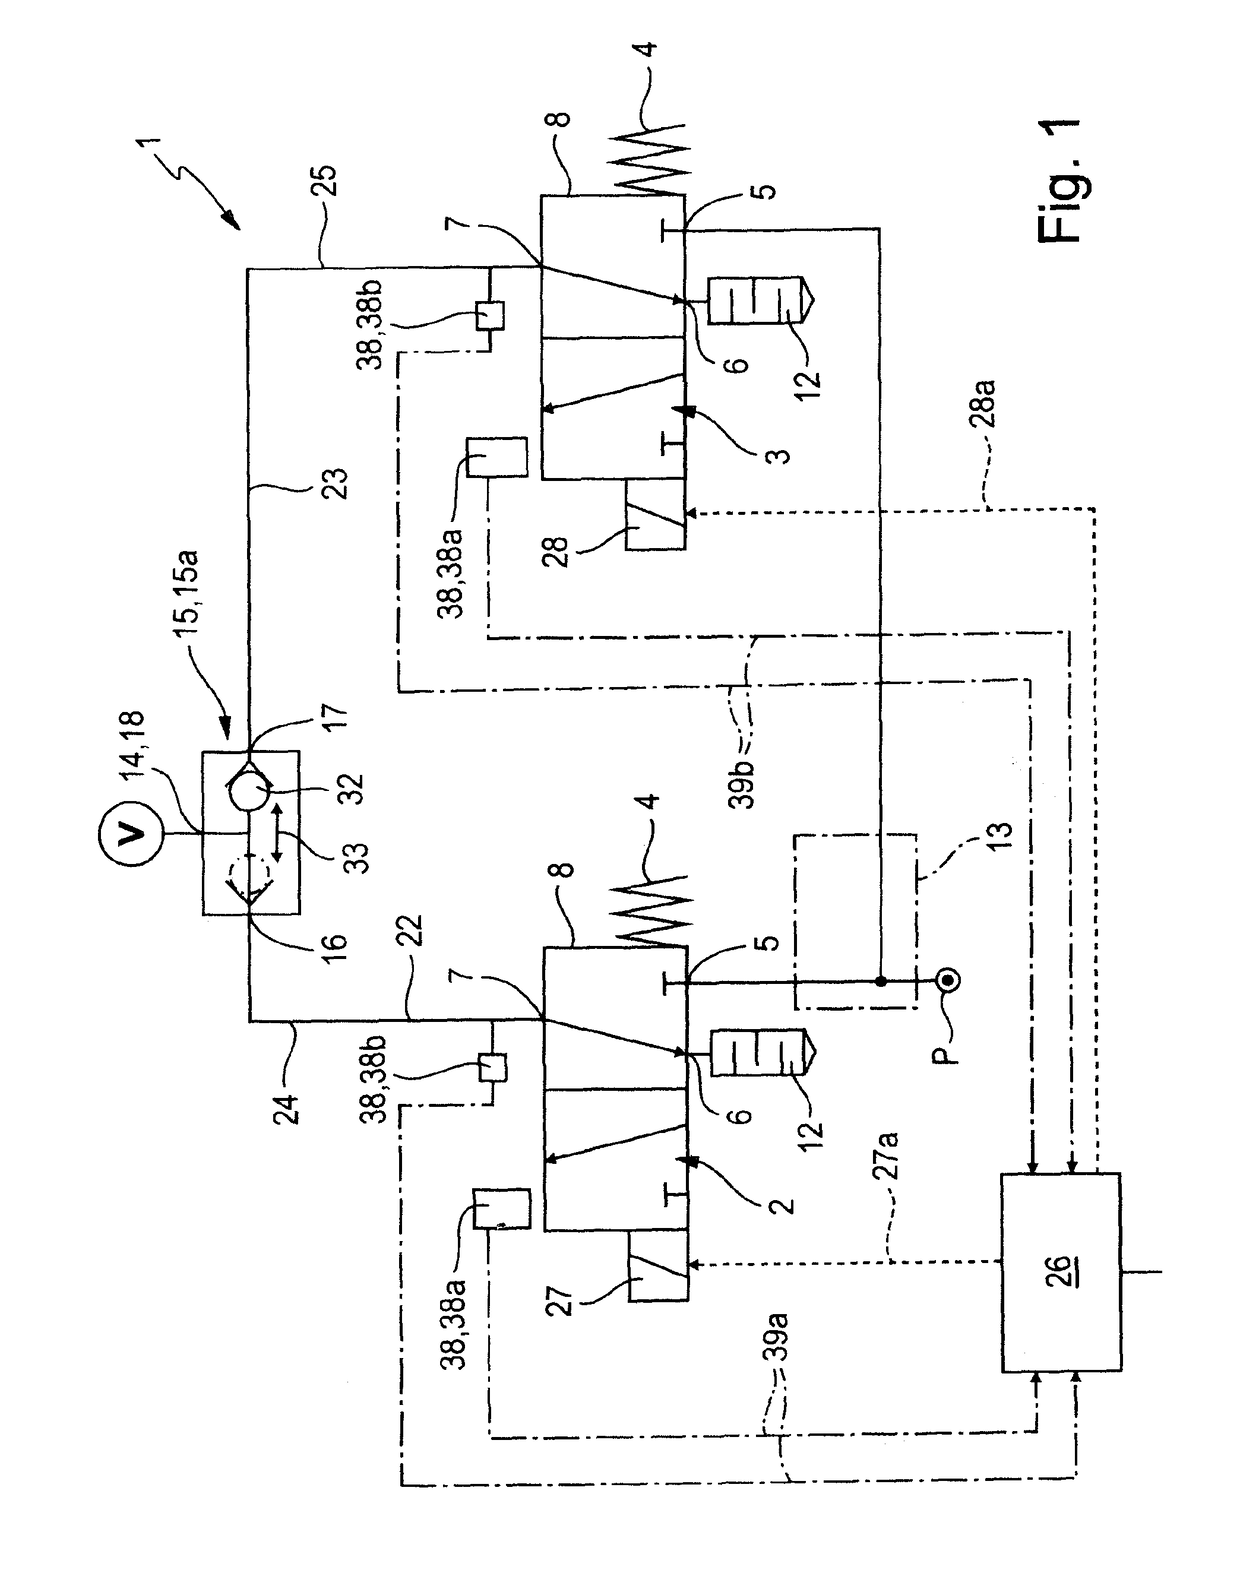 Compressed-air system having a safety function and method for operating such a compressed-air system